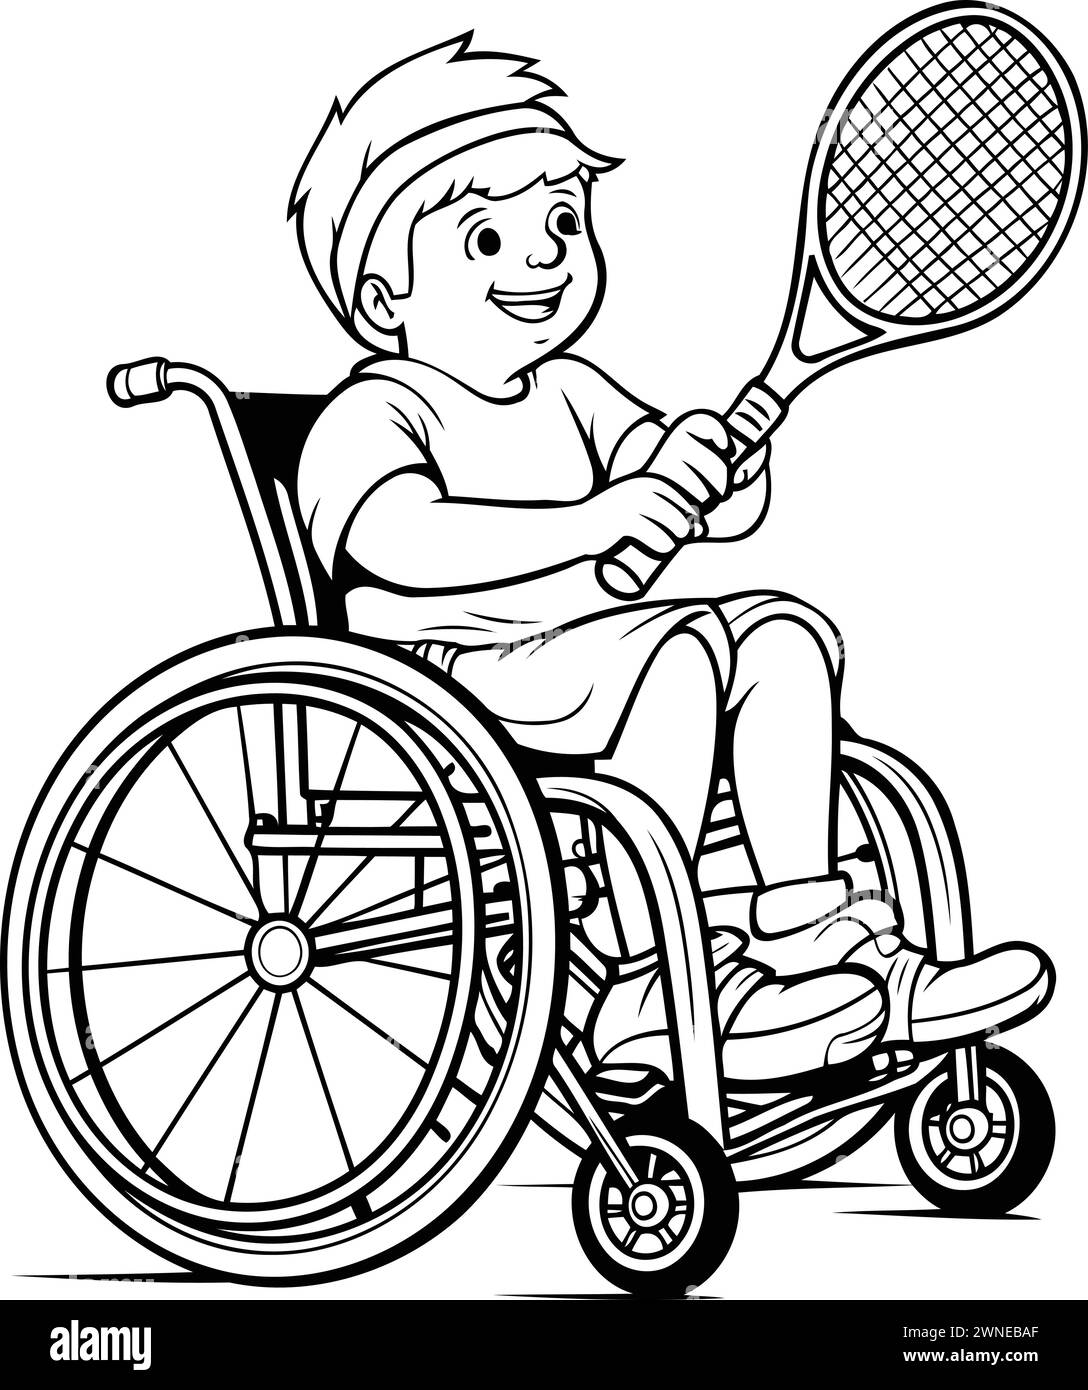 Vector illustration of a disabled boy in a wheelchair with tennis racket. Stock Vector